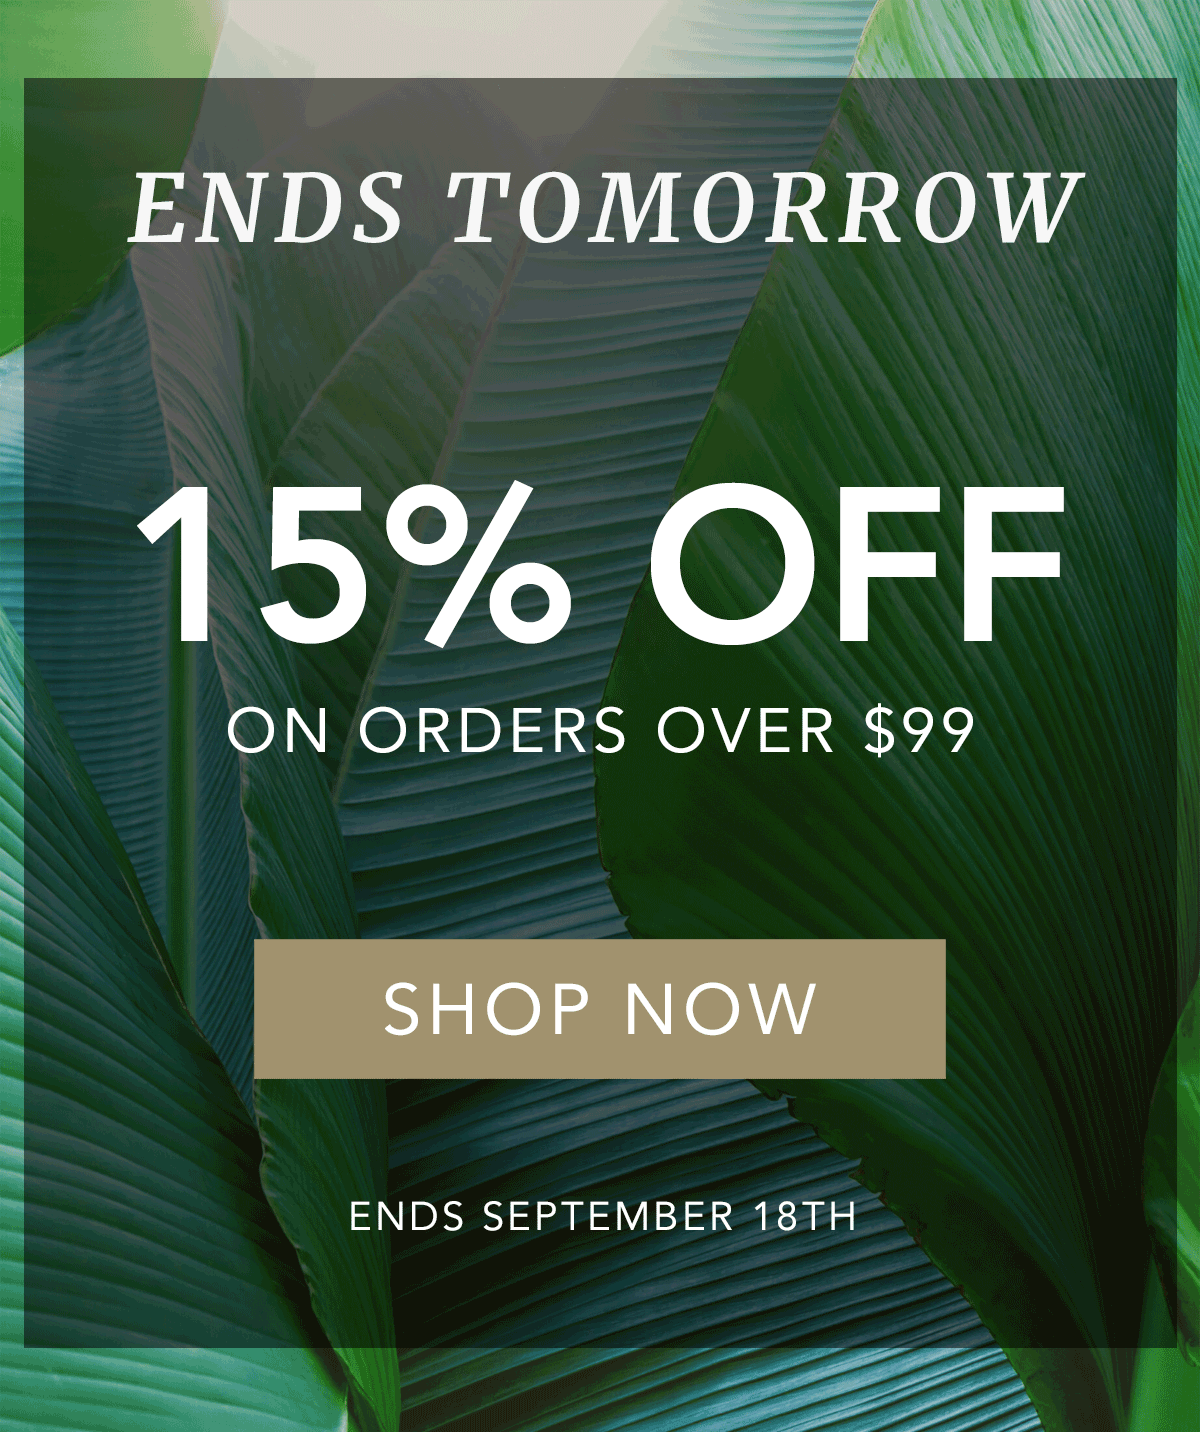 15% OFF STORE WIDE on orders over $99 Ends August 20th